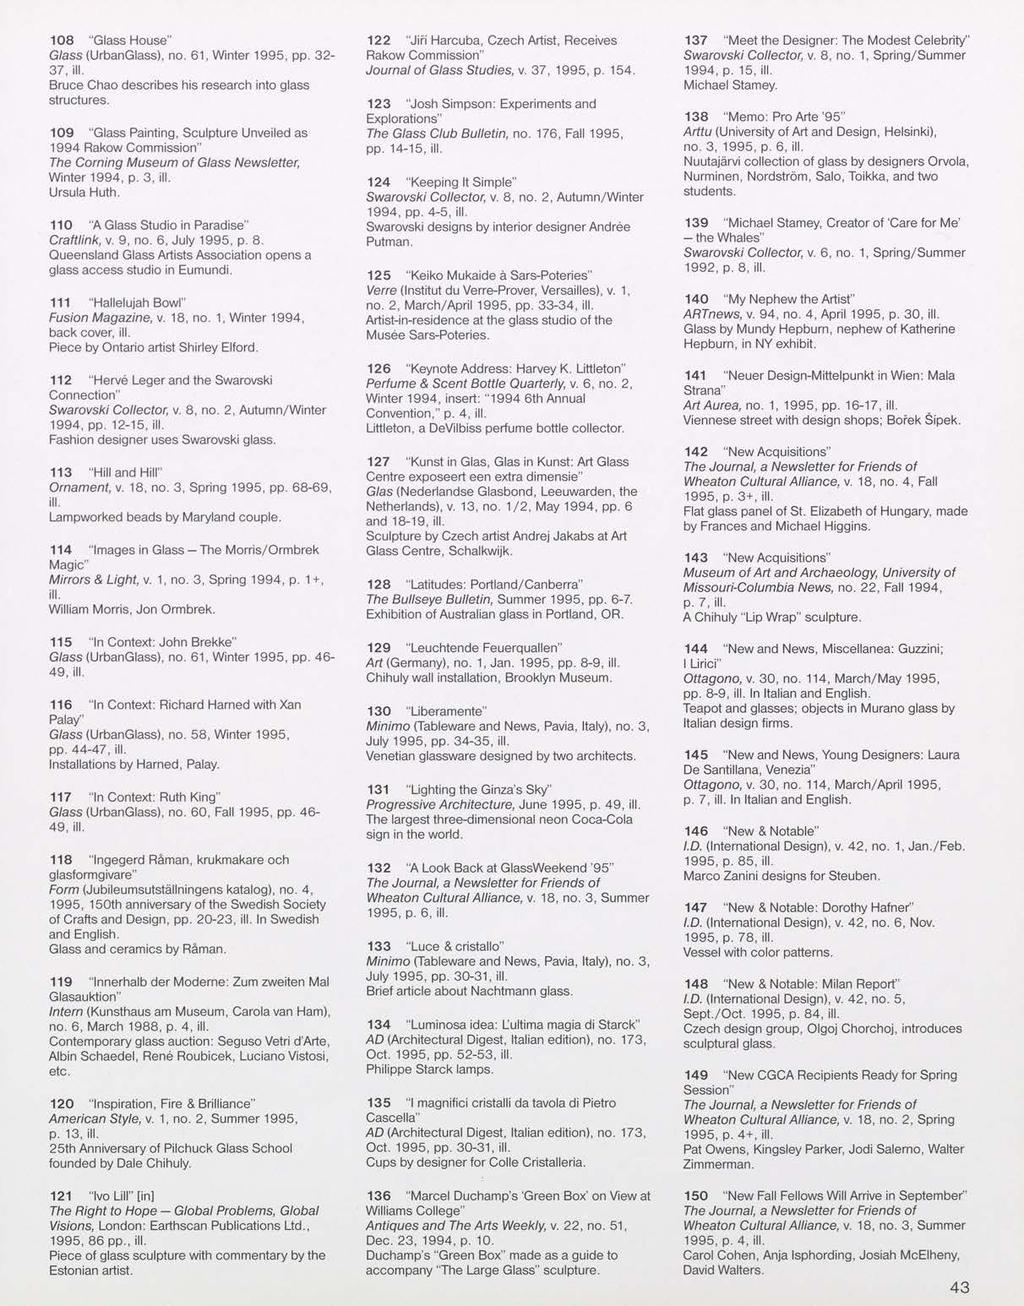 108 "Glass House" Glass (UrbanGlass), no. 61, Winter 1995, pp. 32-37, Bruce Chao describes his research into glass structures.